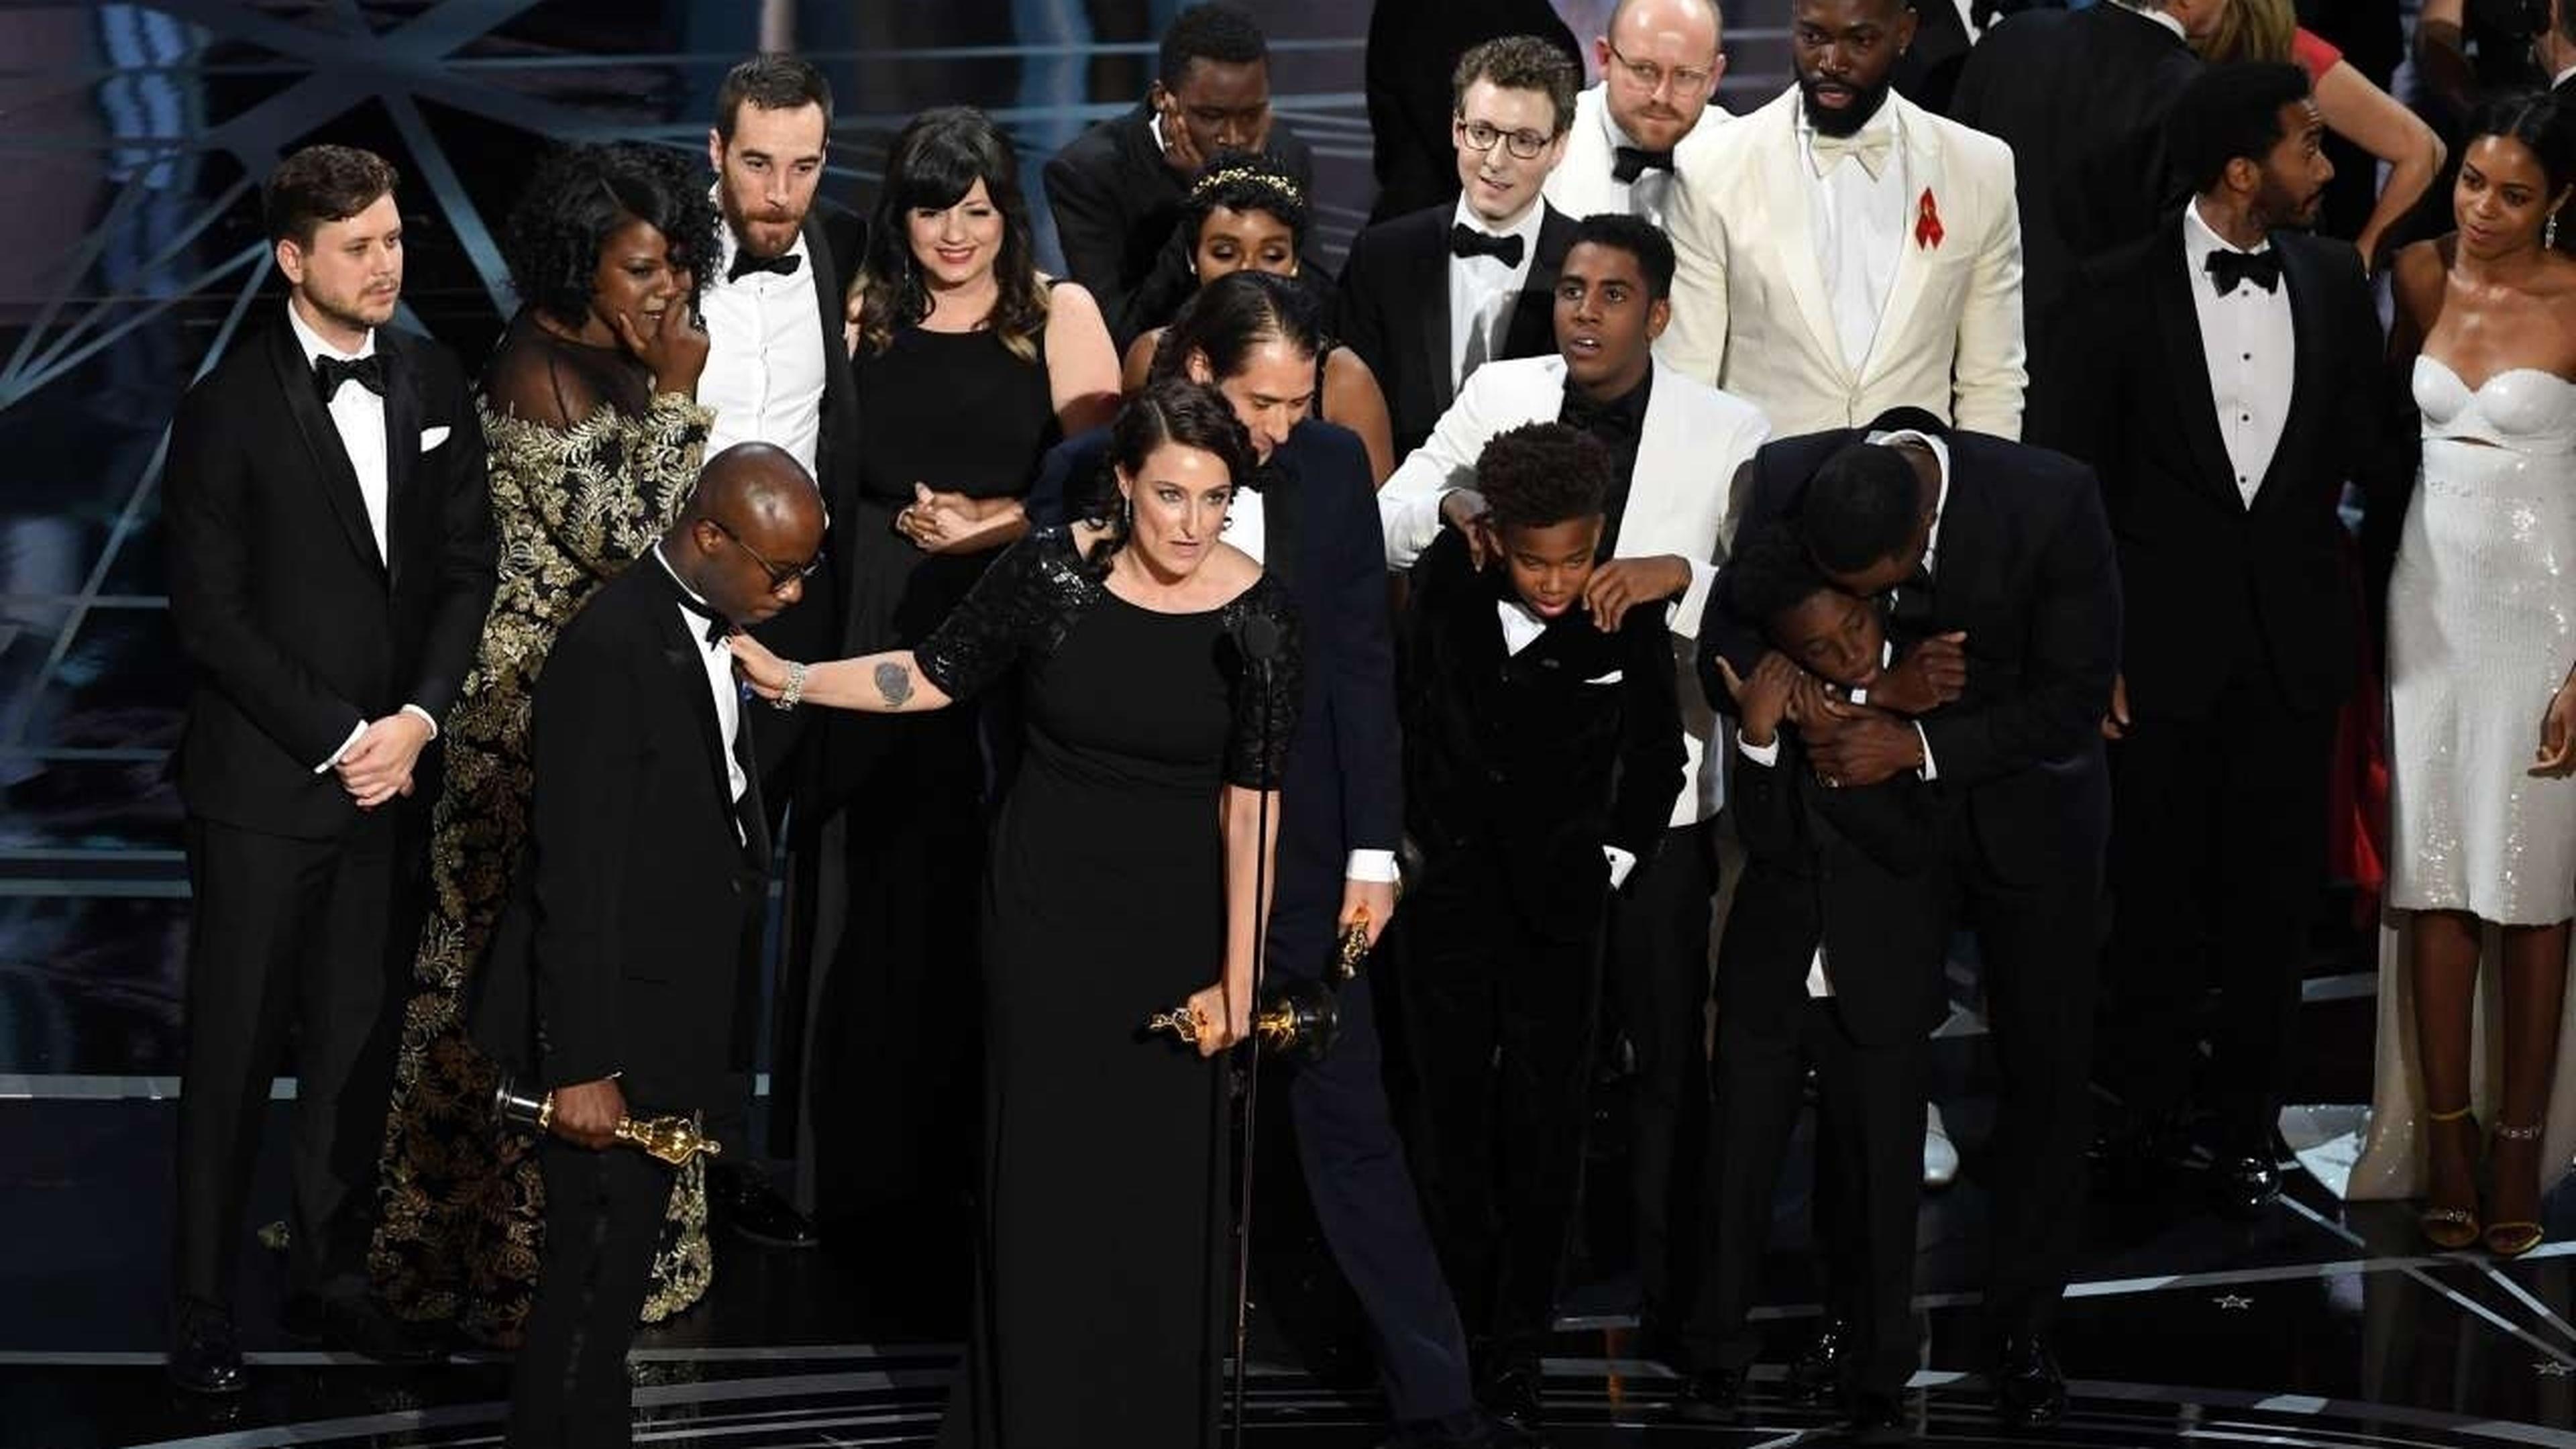 Moonlight' crowned best picture after chaotic scenes at Oscars